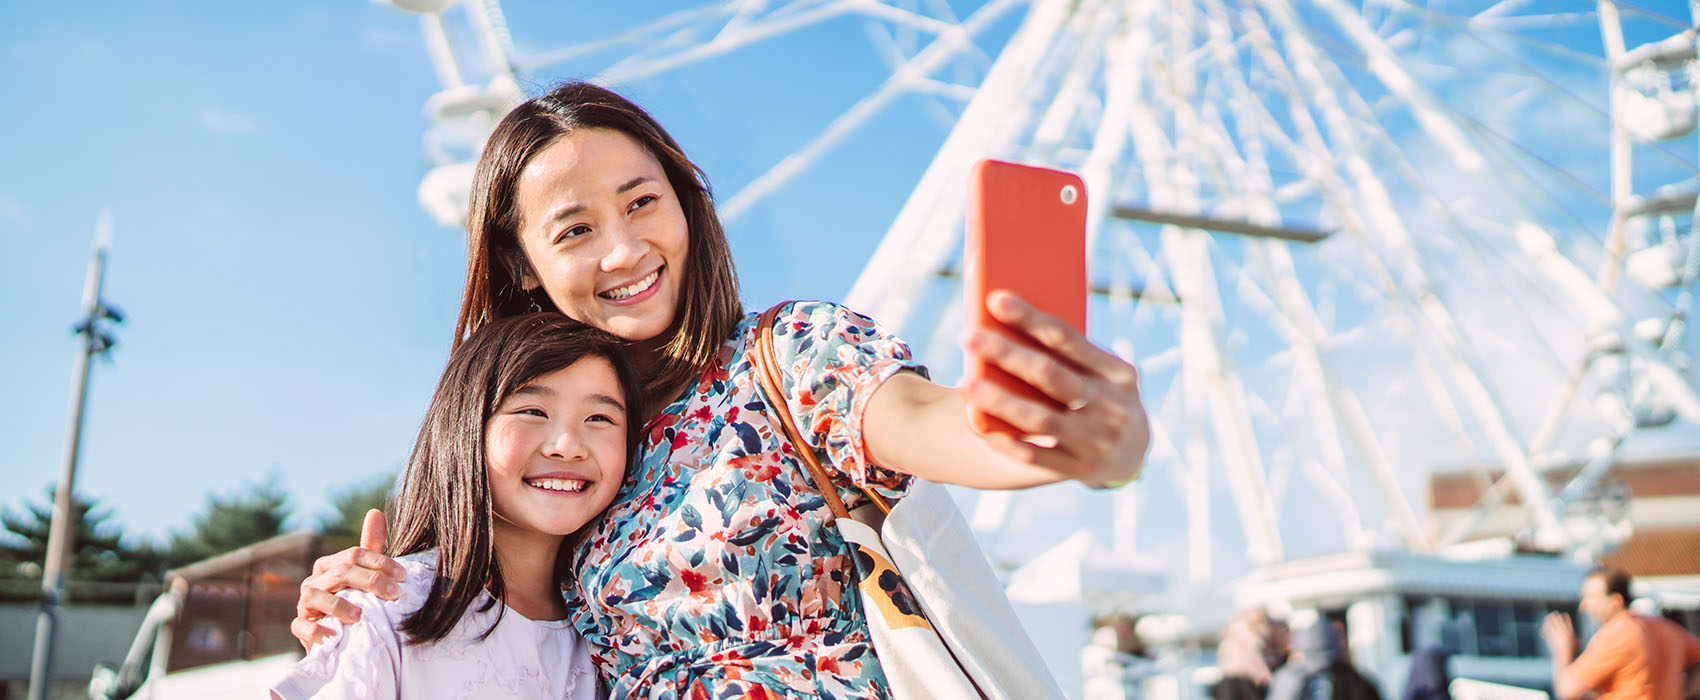 Mom and daughter take selfie with phone in bright orange case in front of a white ferris wheel on a sunny day